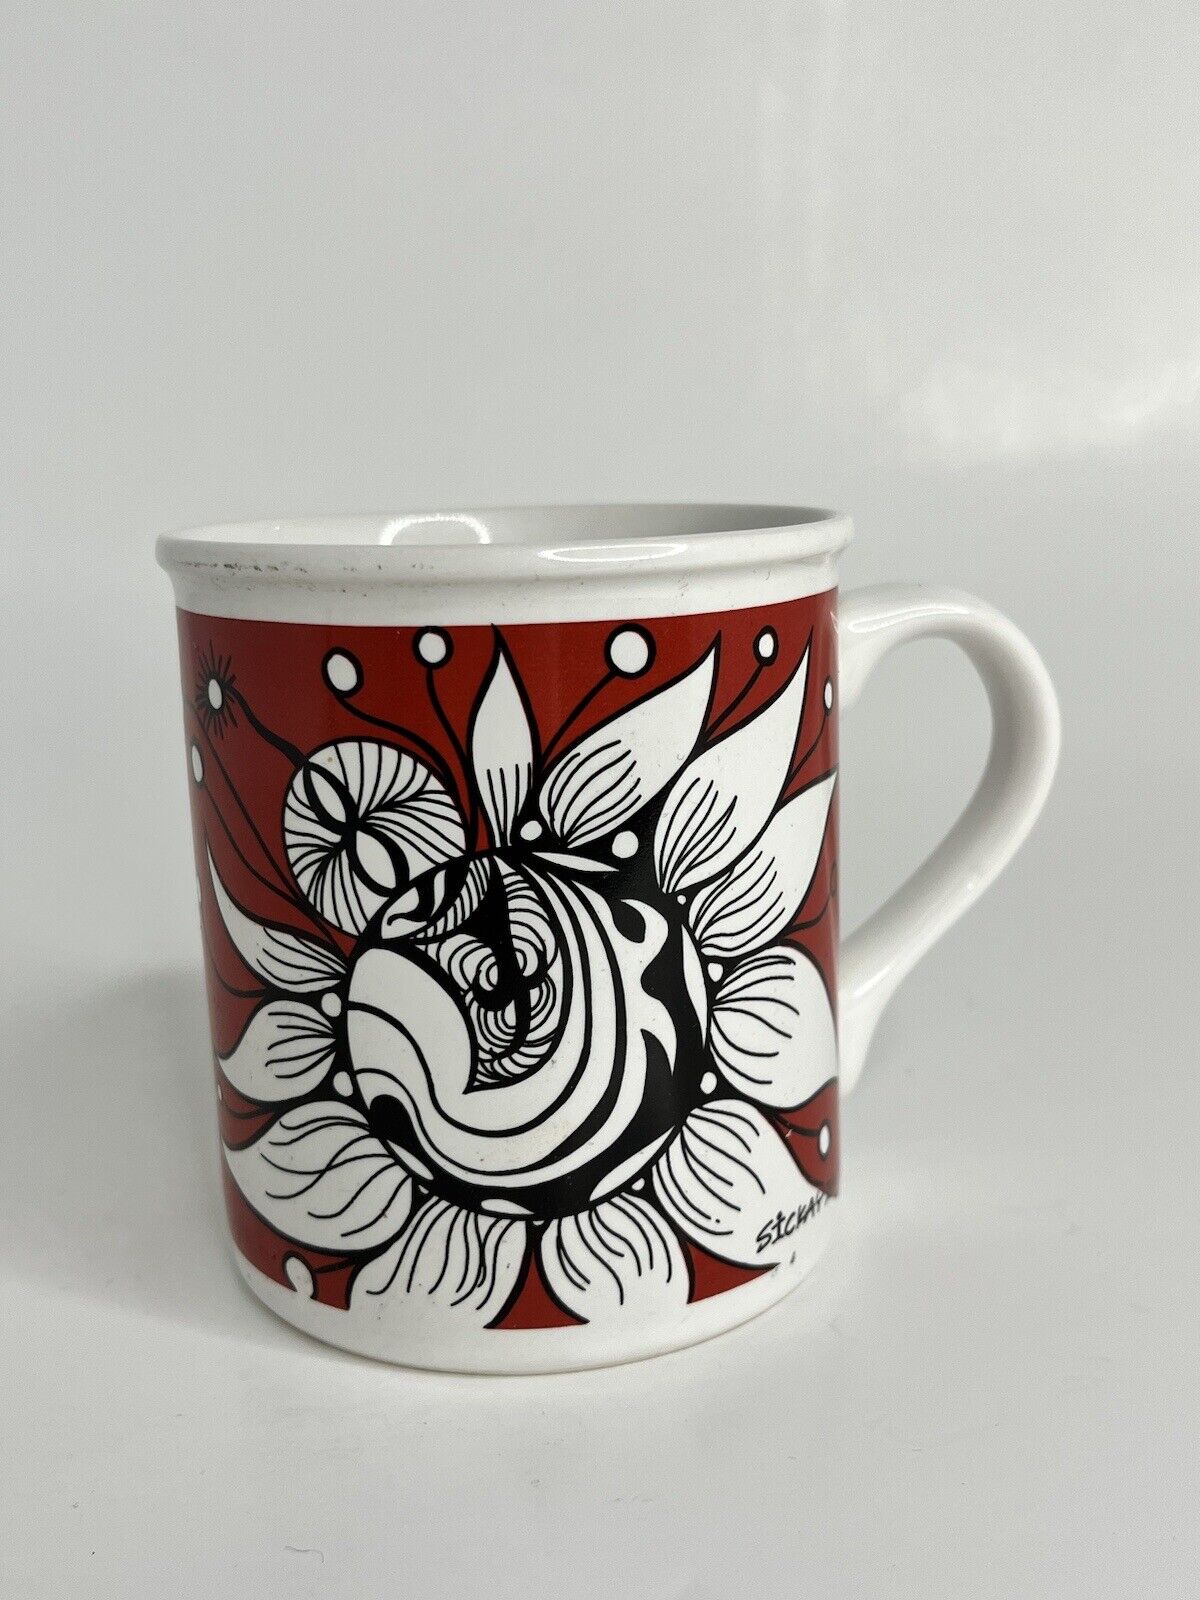 Ceramic Coffee Mug The Other Mugs 1997 Red Floral Bug Art Red White 8oz